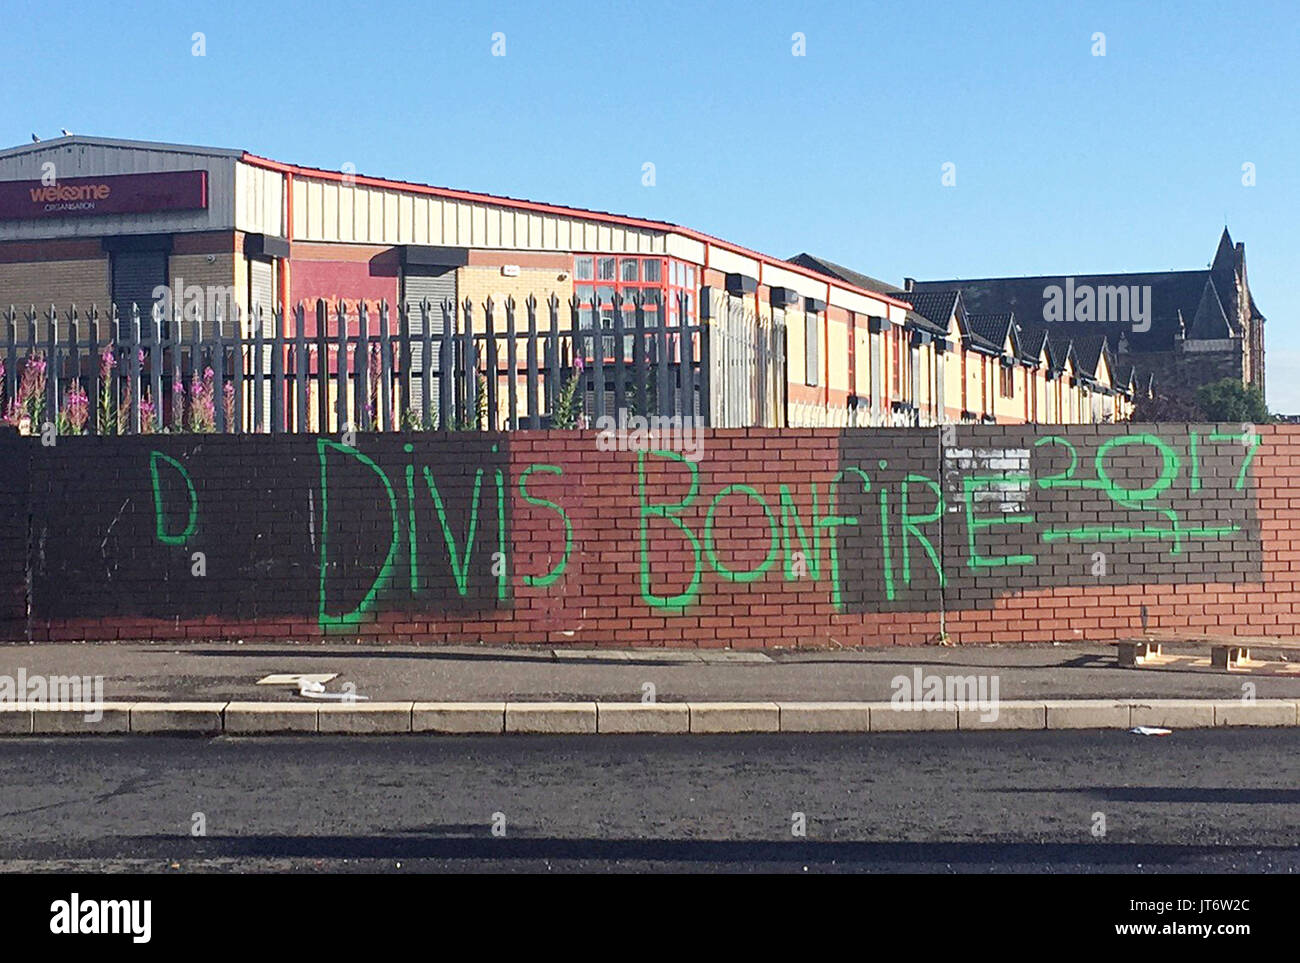 RETRANSMITTED CHANGING LOCATION FROM MARKETS AREA TO DIVIS AREA Graffiti on Divis street in Belfast, where Police have been attacked and cars torched by masked youths apparently angered by the removal of wood from the site of a nationalist bonfire in Belfast. Stock Photo